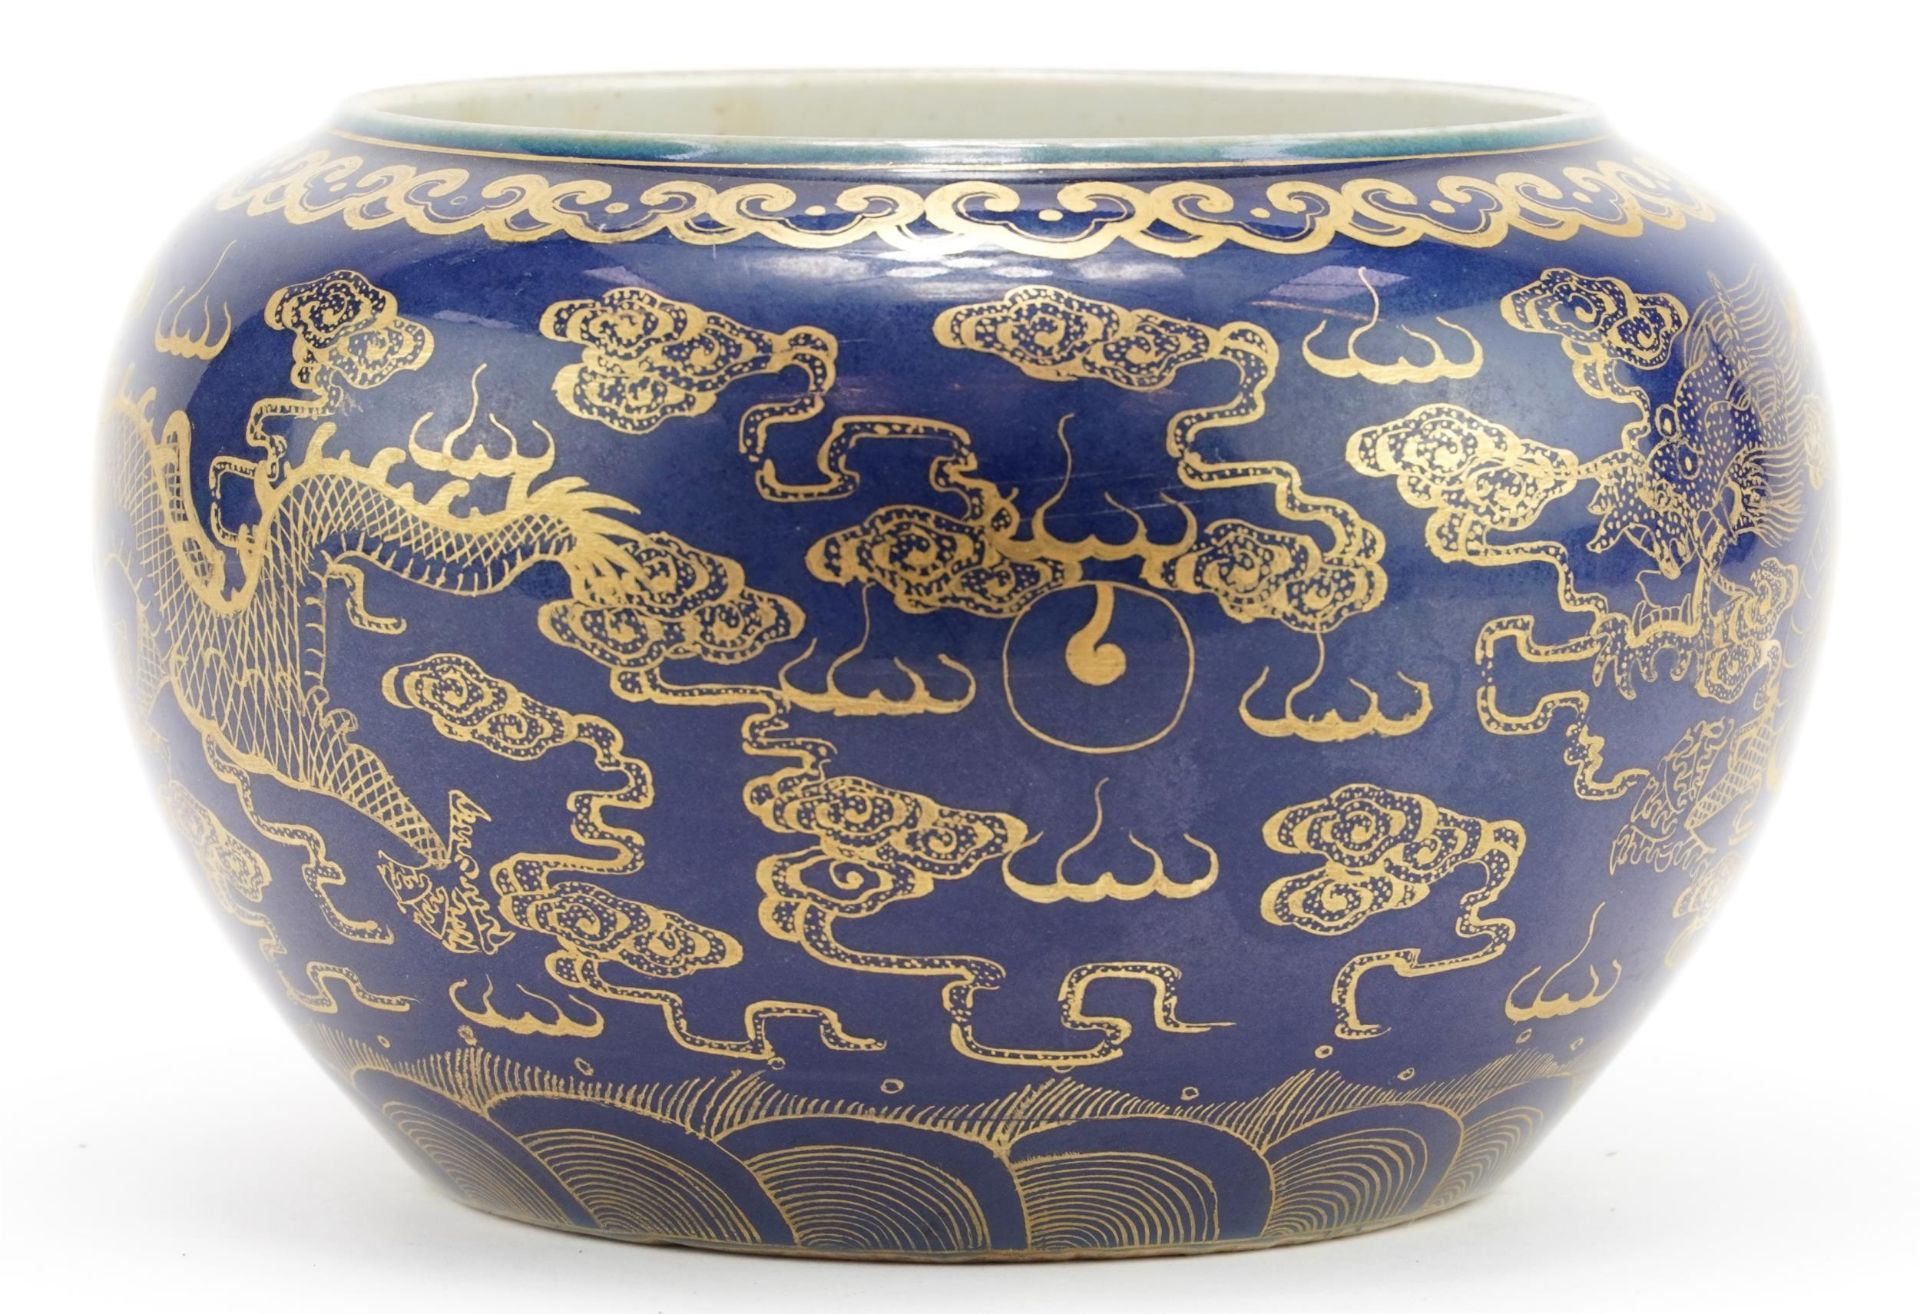 Chinese porcelain powder blue ground jardiniere gilded with dragons chasing the flaming pearl - Image 3 of 6